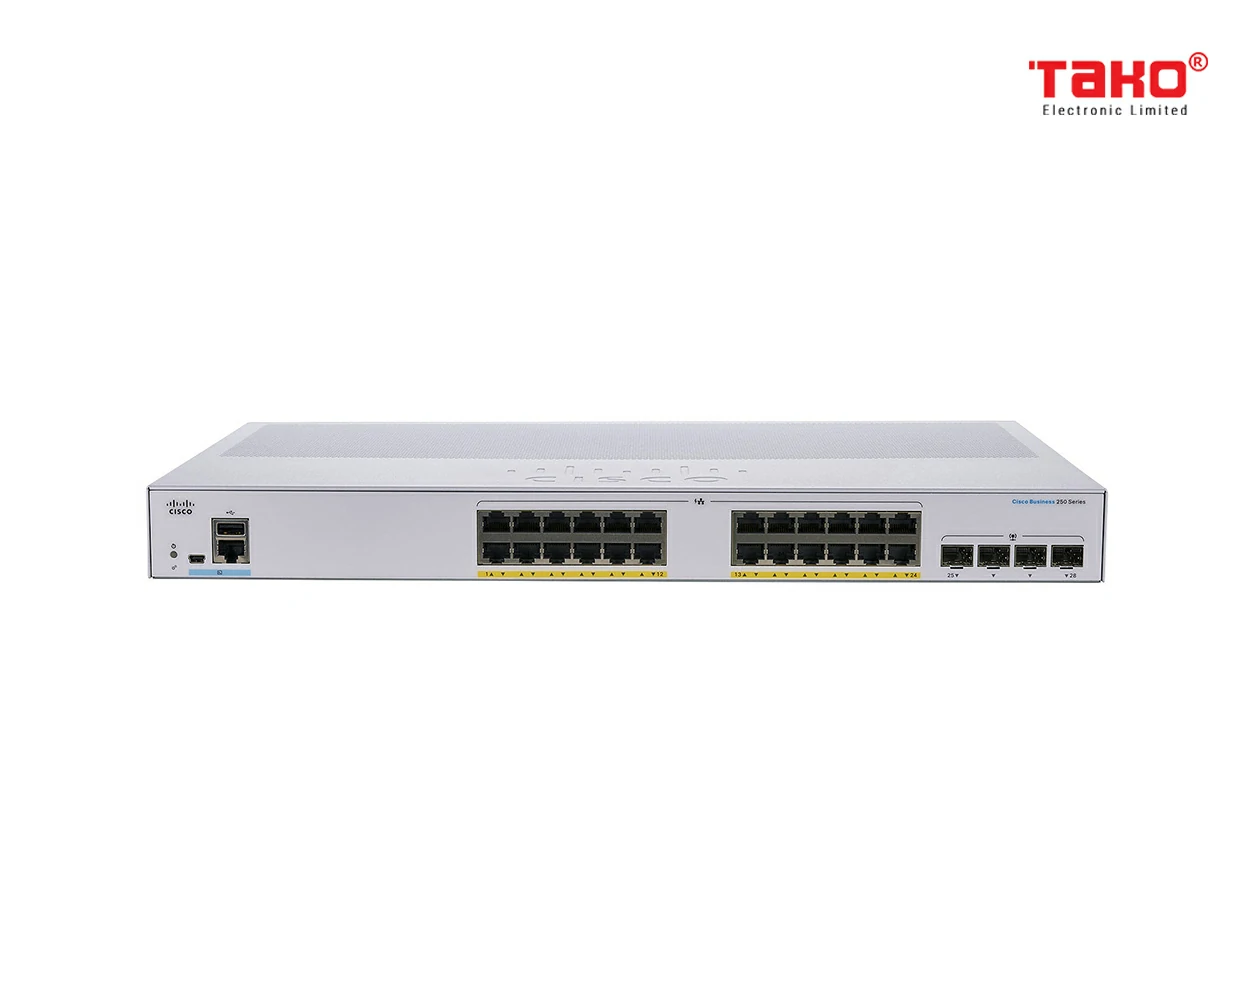 Cisco CBS350-24FP-4X 24-port 10/100/1000 Mbps PoE Layer 3 manageable web switch 4 x 10 Gbps SFP slots 1